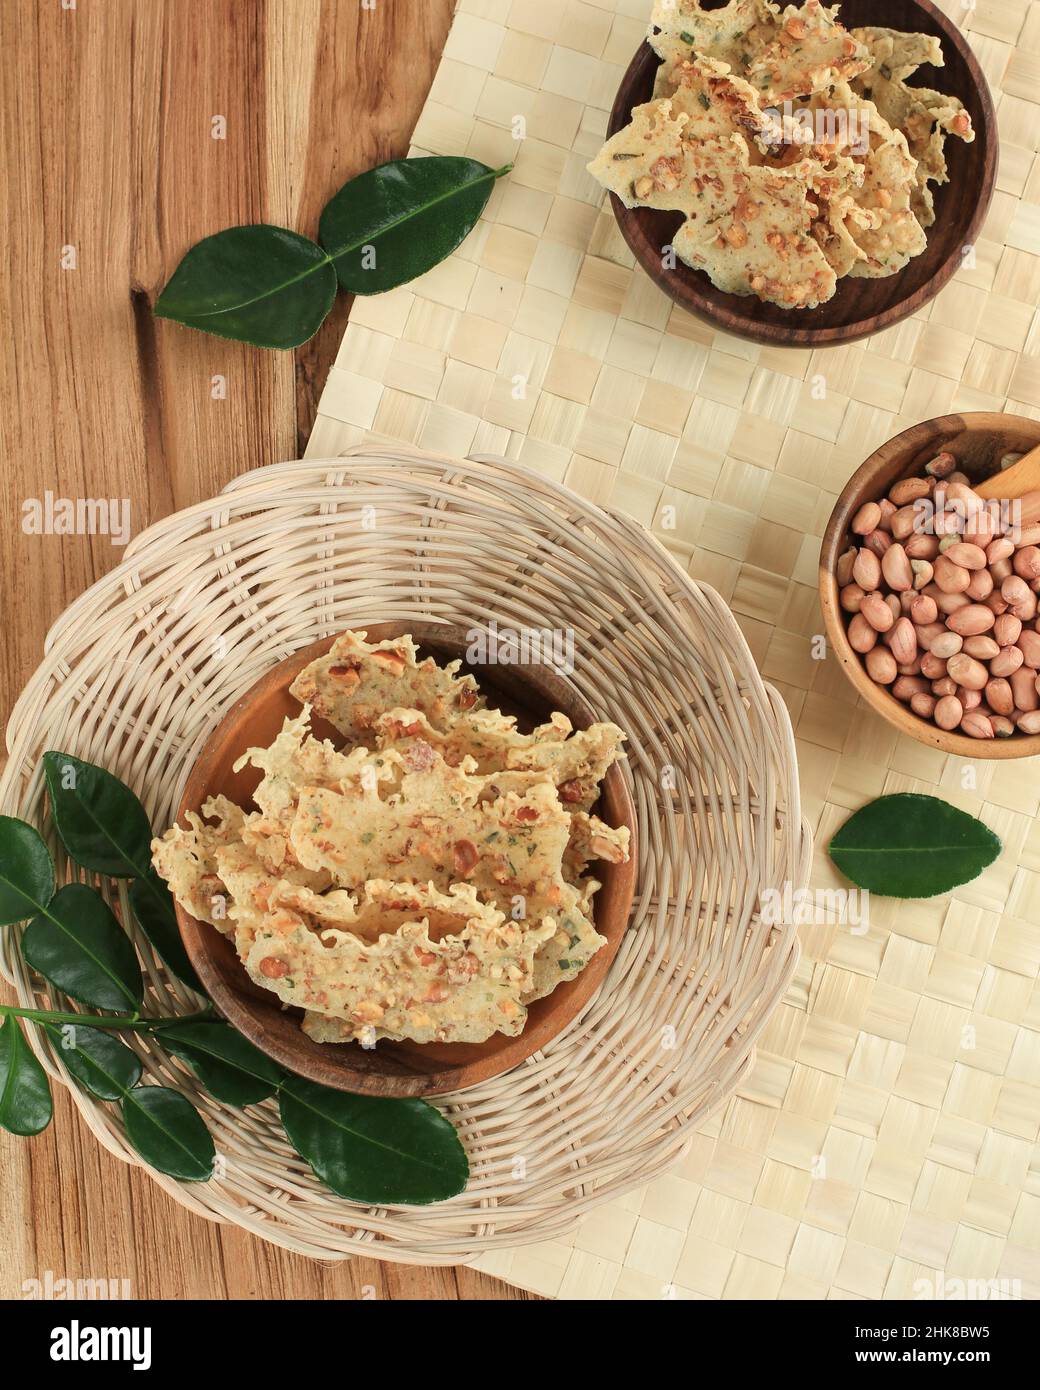 Rempeyek Kacang or Peyek Kacang is Traditional Snack from Java, Indonesia. Rempeyek is Fried Fritter  Made from Rice Flour and Water with Peanuts on T Stock Photo